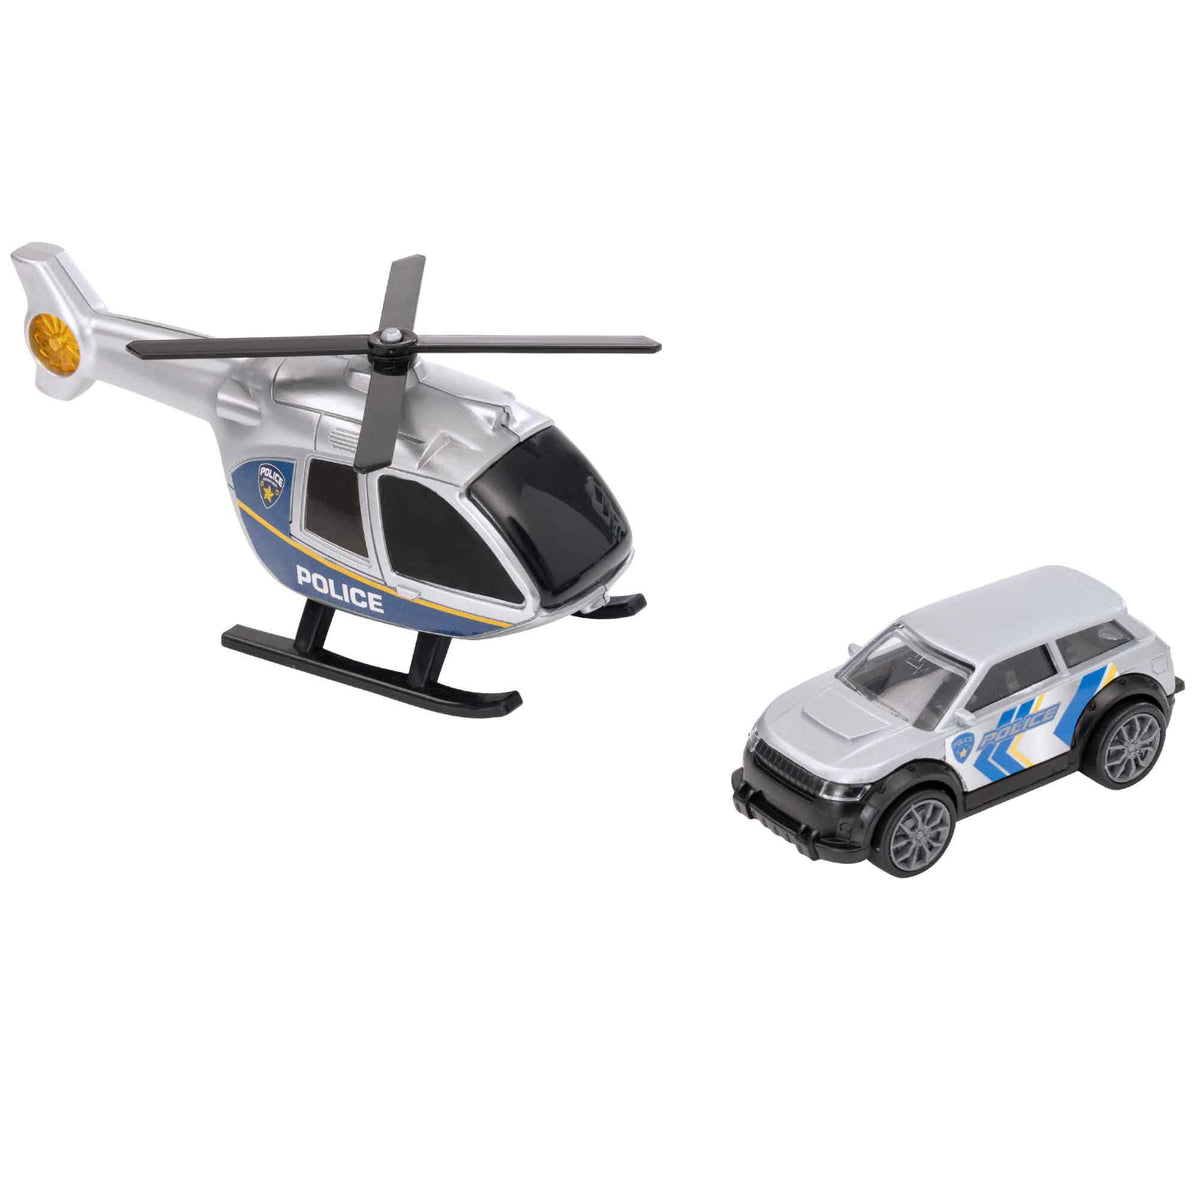 Teamsterz Mighty Machines Small Police Helicopter Transporter